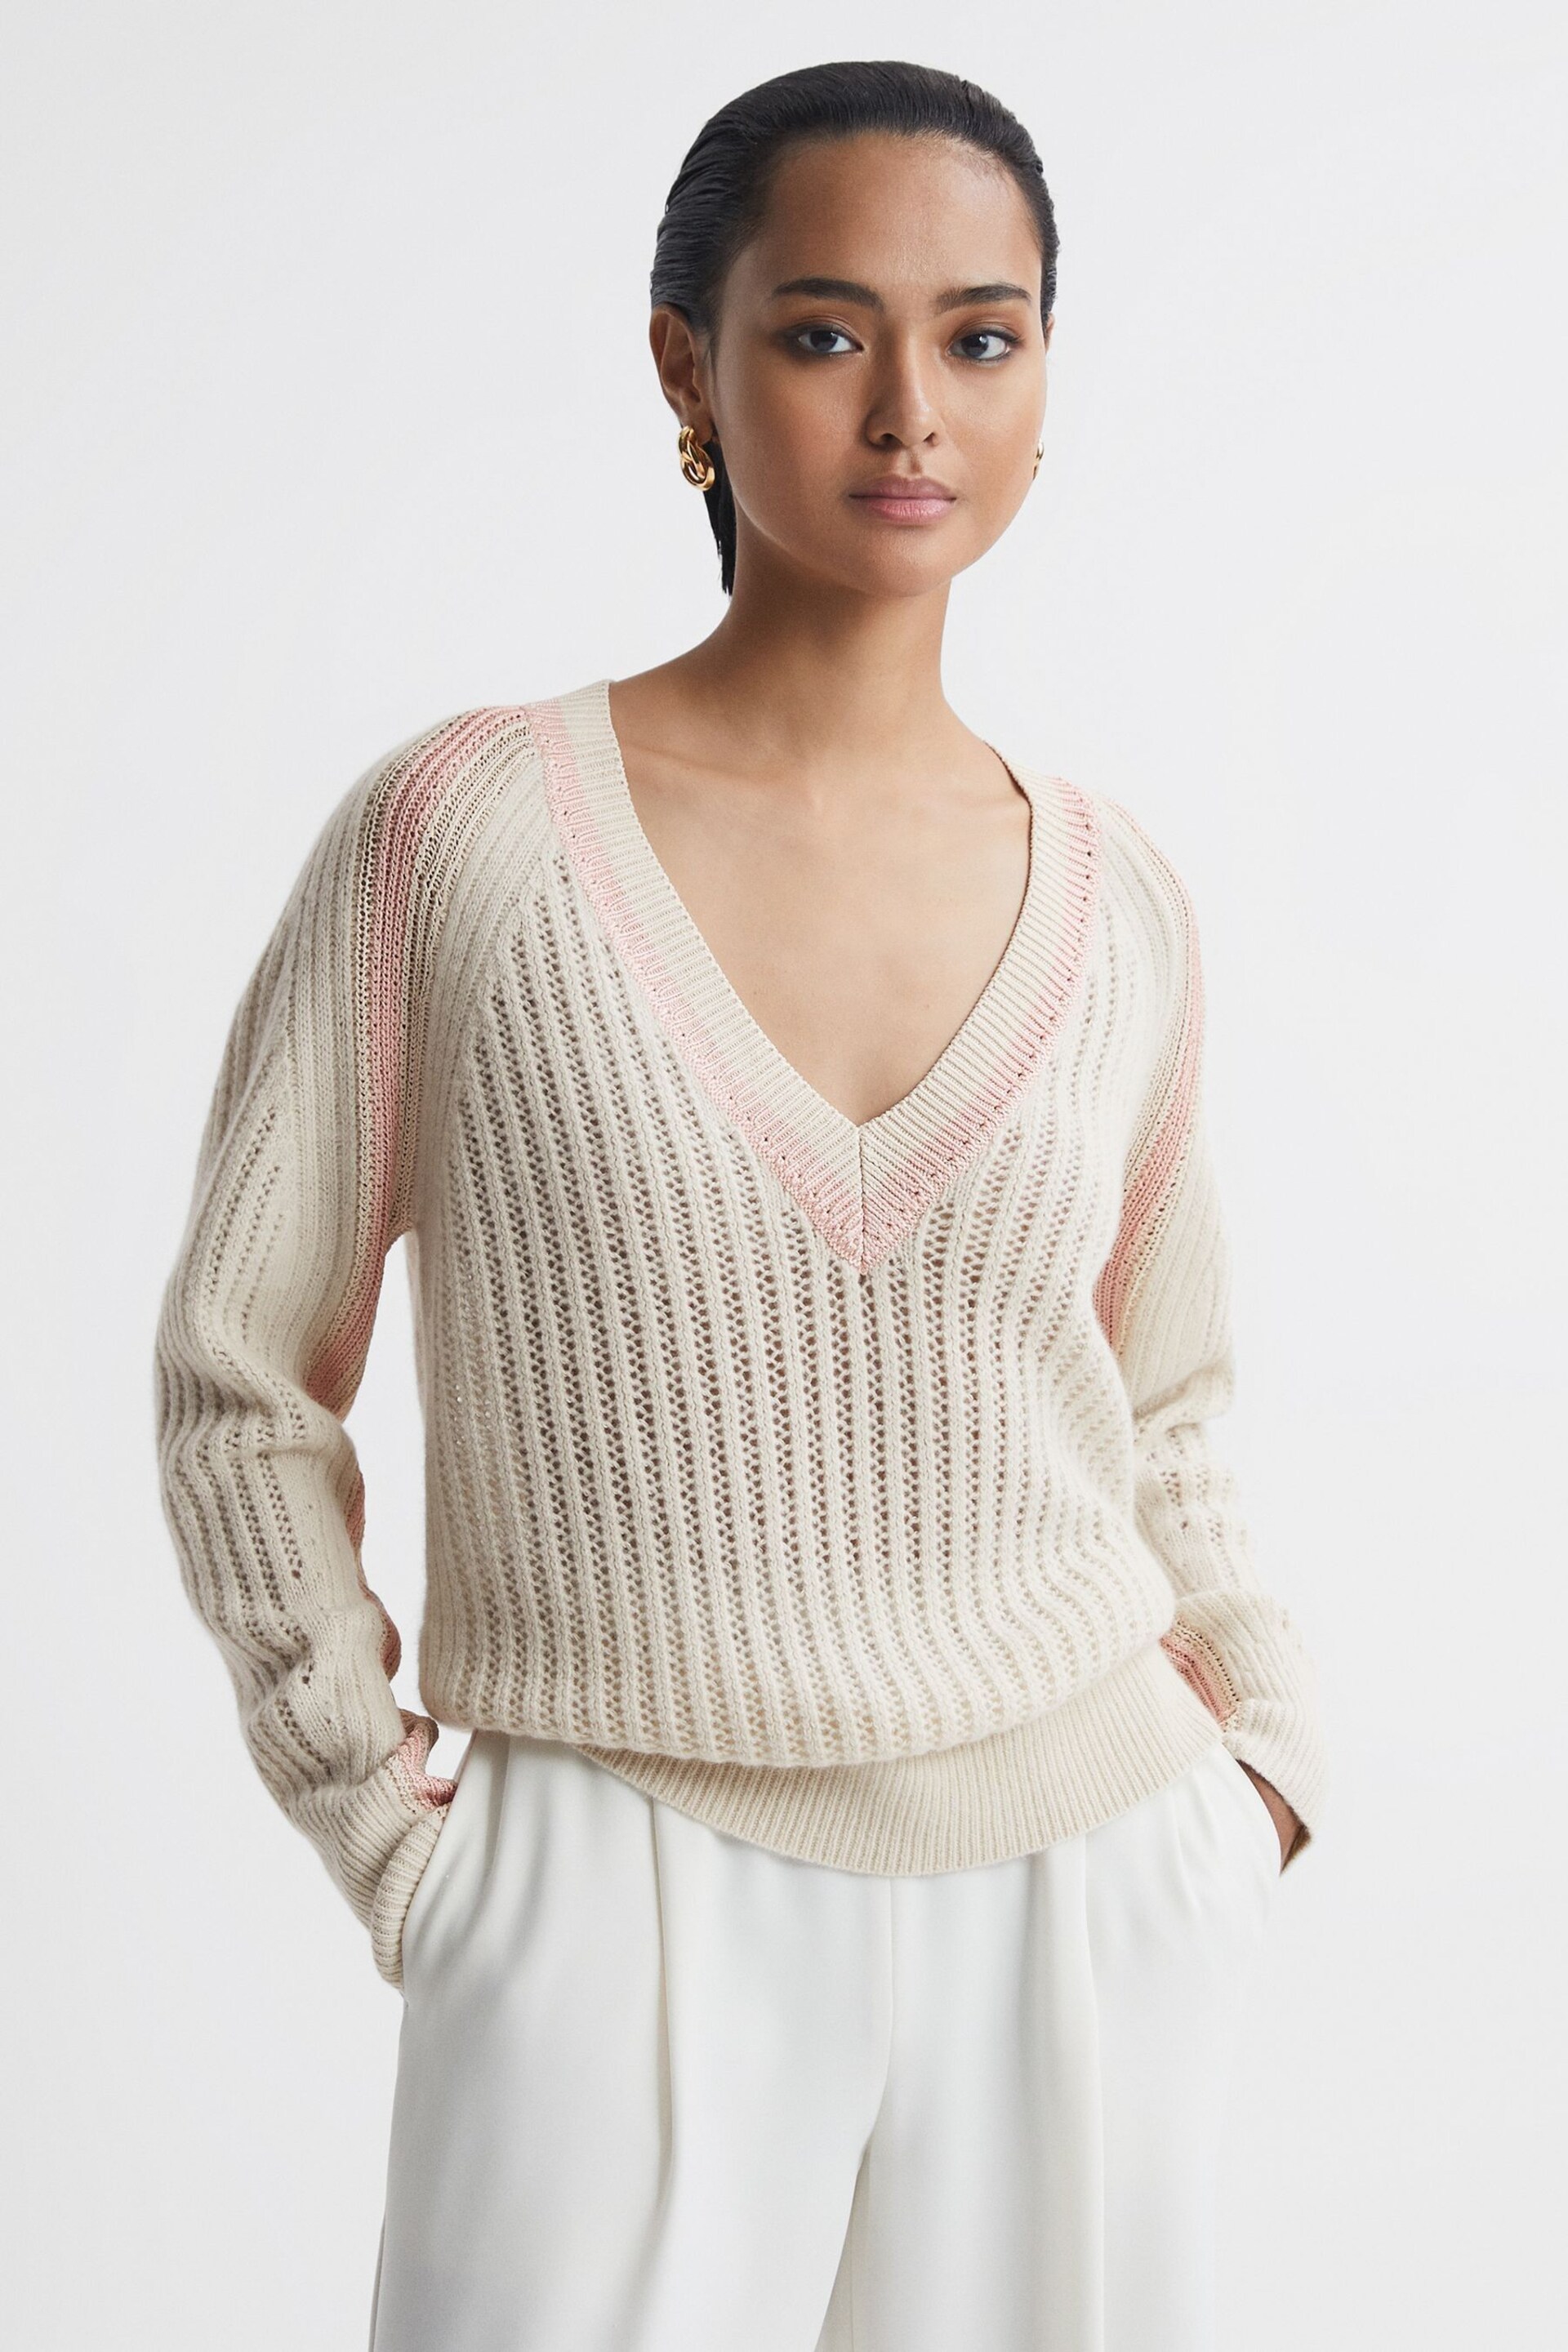 Reiss Cream/Nude Vale Wool Blend Knitted V-Neck Jumper - Image 1 of 5